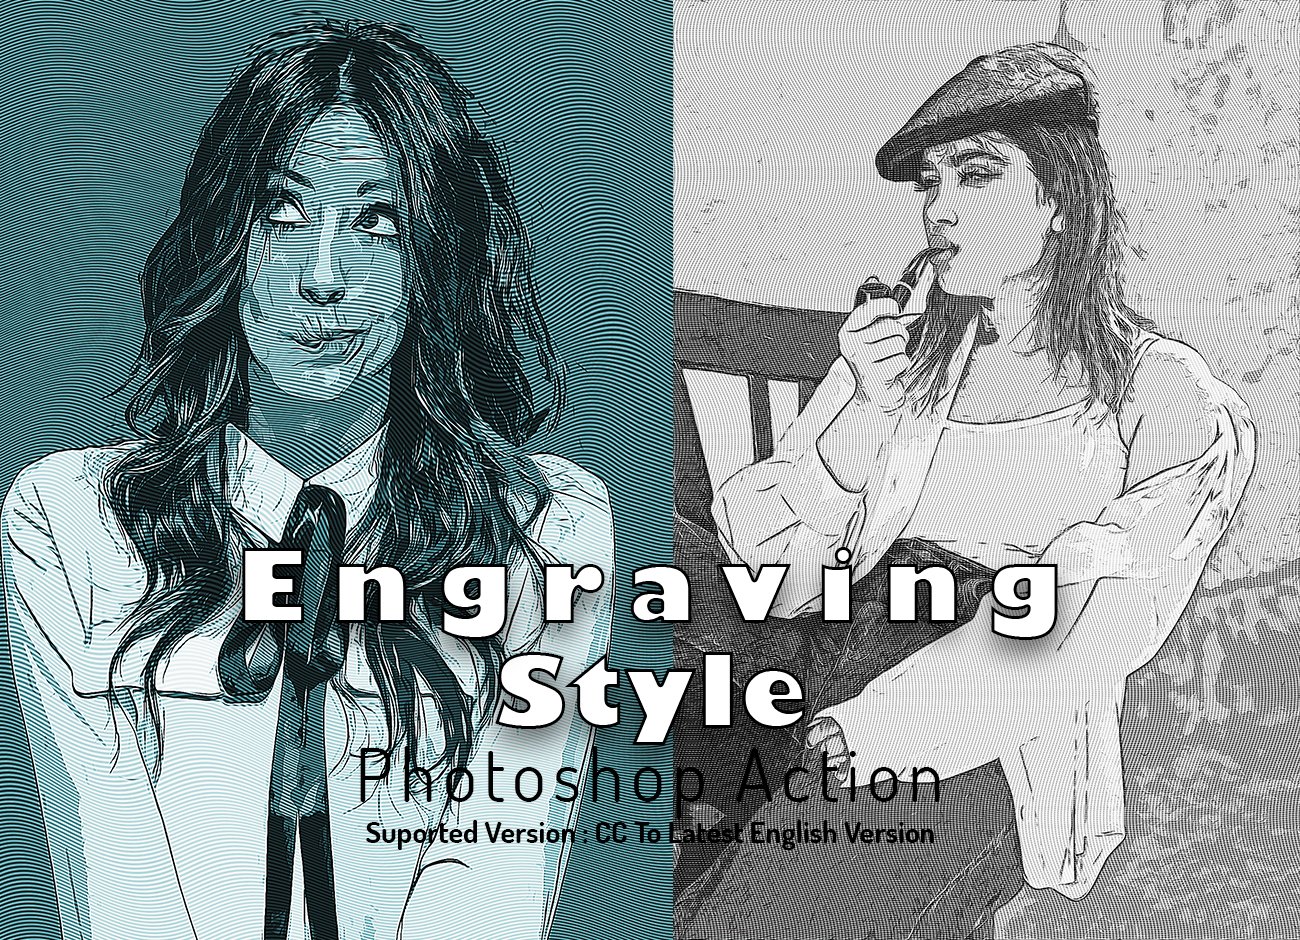 Engraving Style Photoshop Actioncover image.